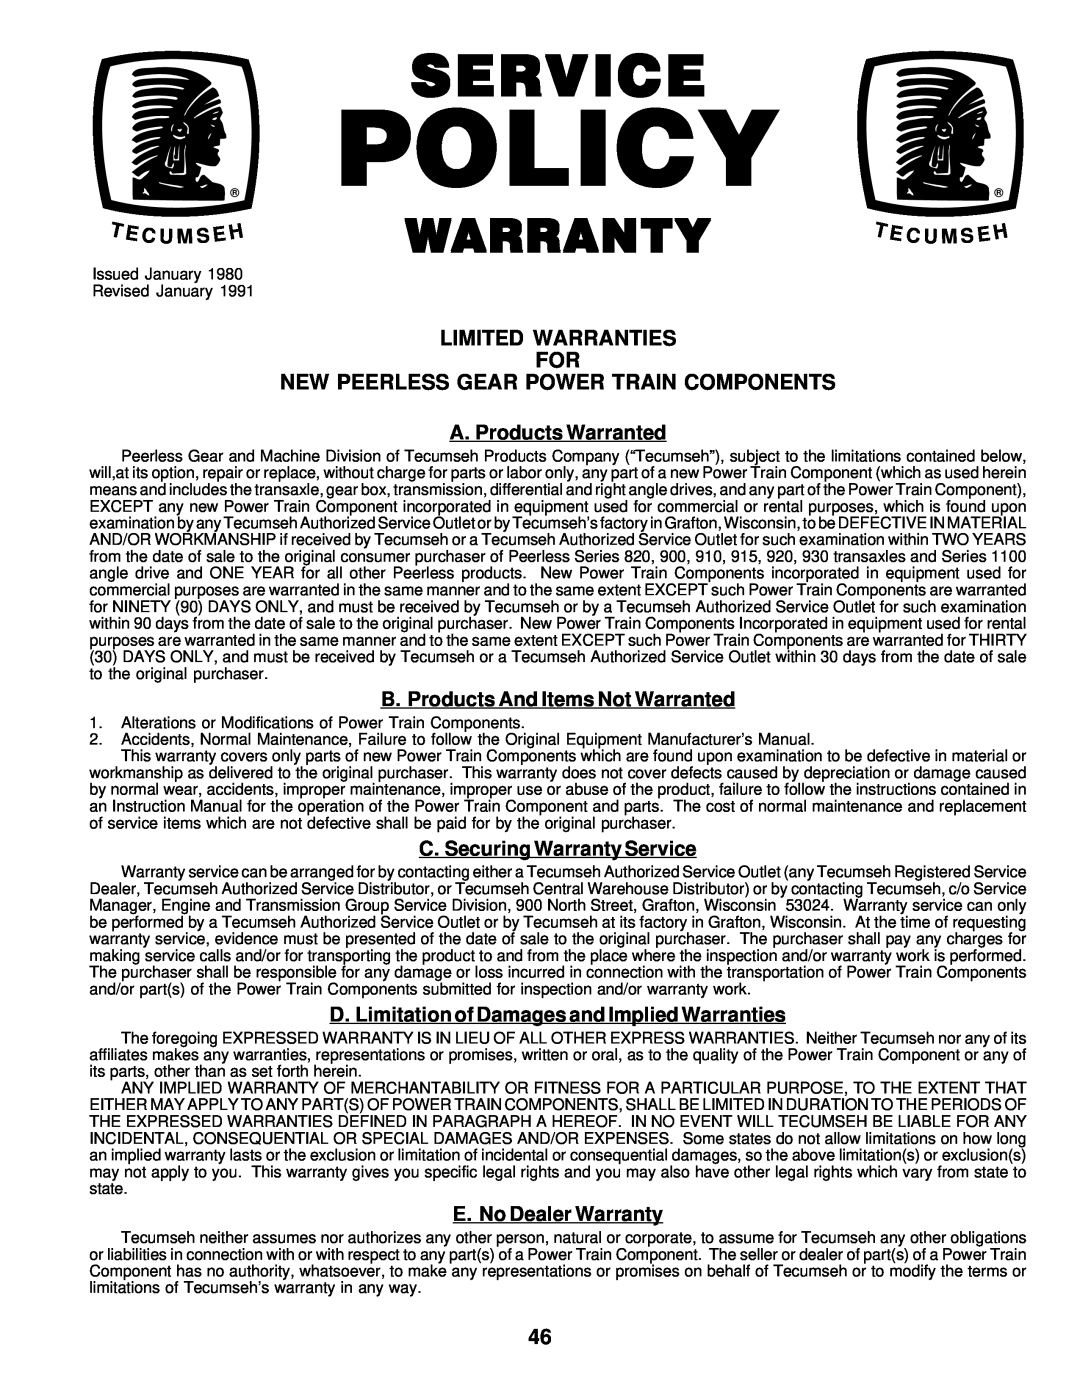 Poulan 177545 Warranty, Limited Warranties For New Peerless Gear Power Train Components, T E C U M S Eh, Policy, Service 